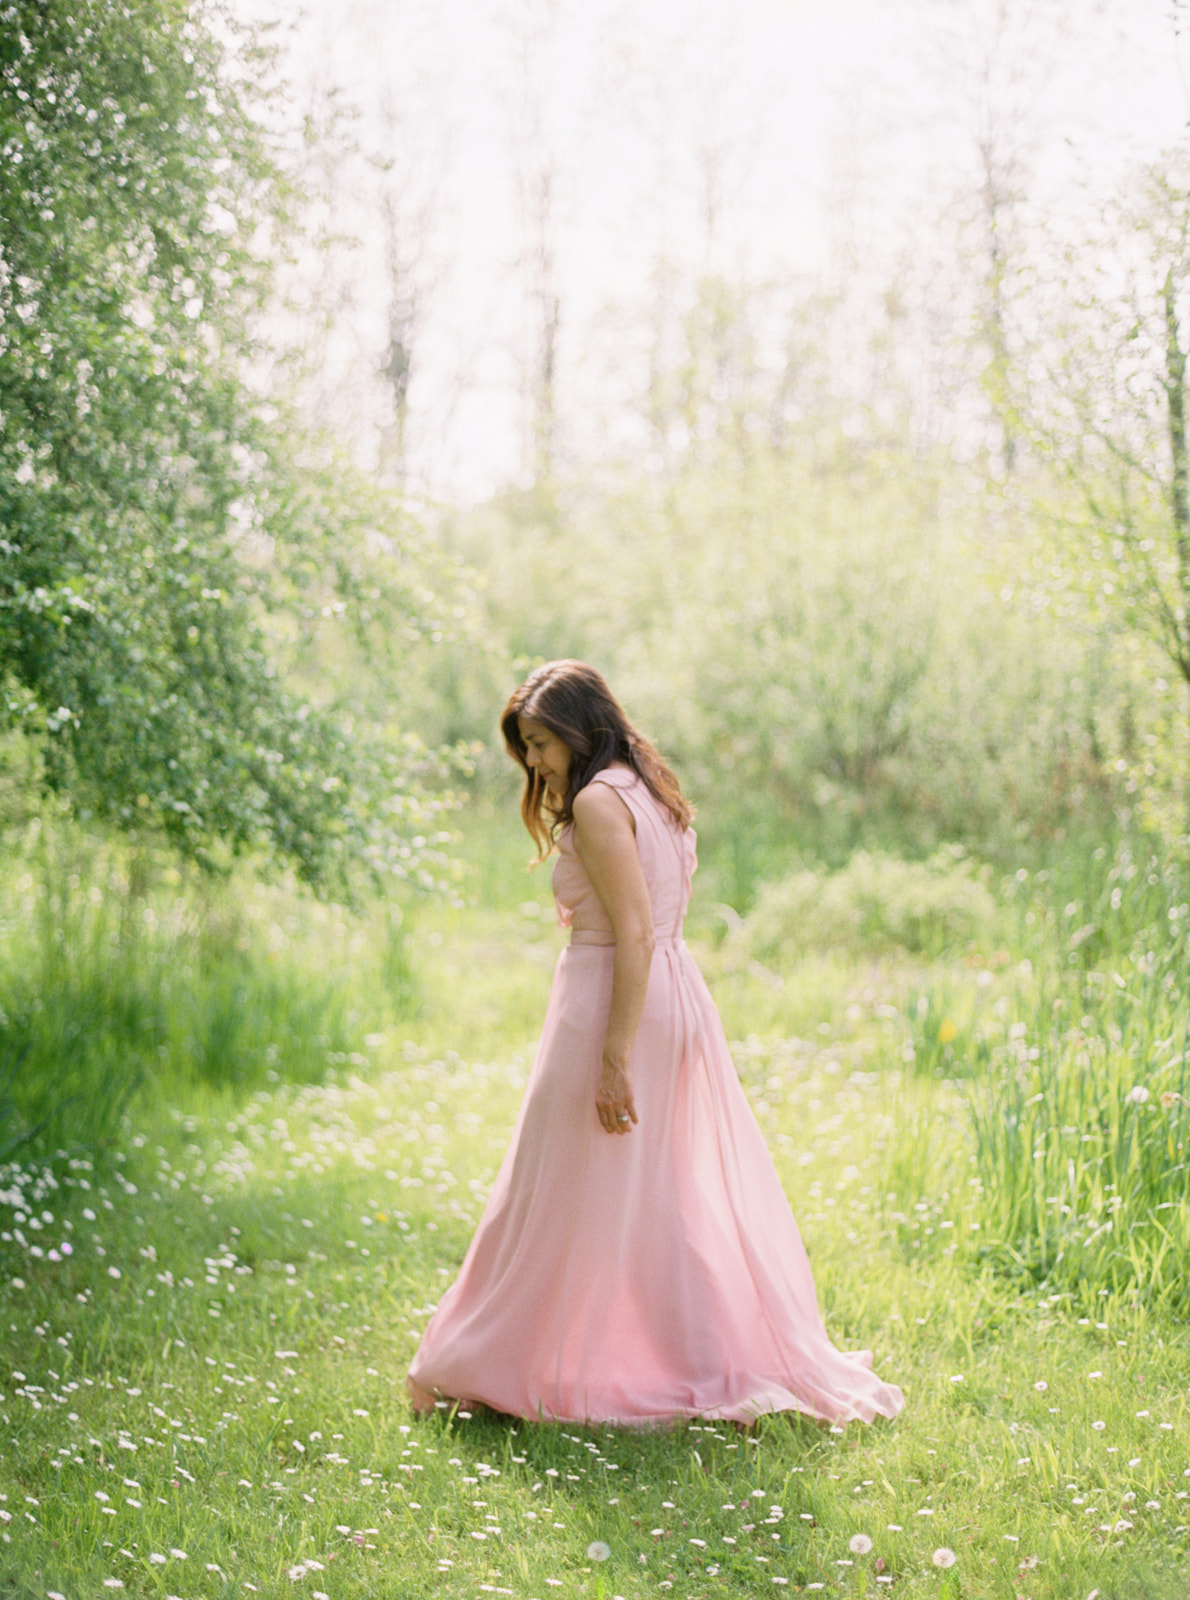 a woman in a pink dress walks by a willow tree